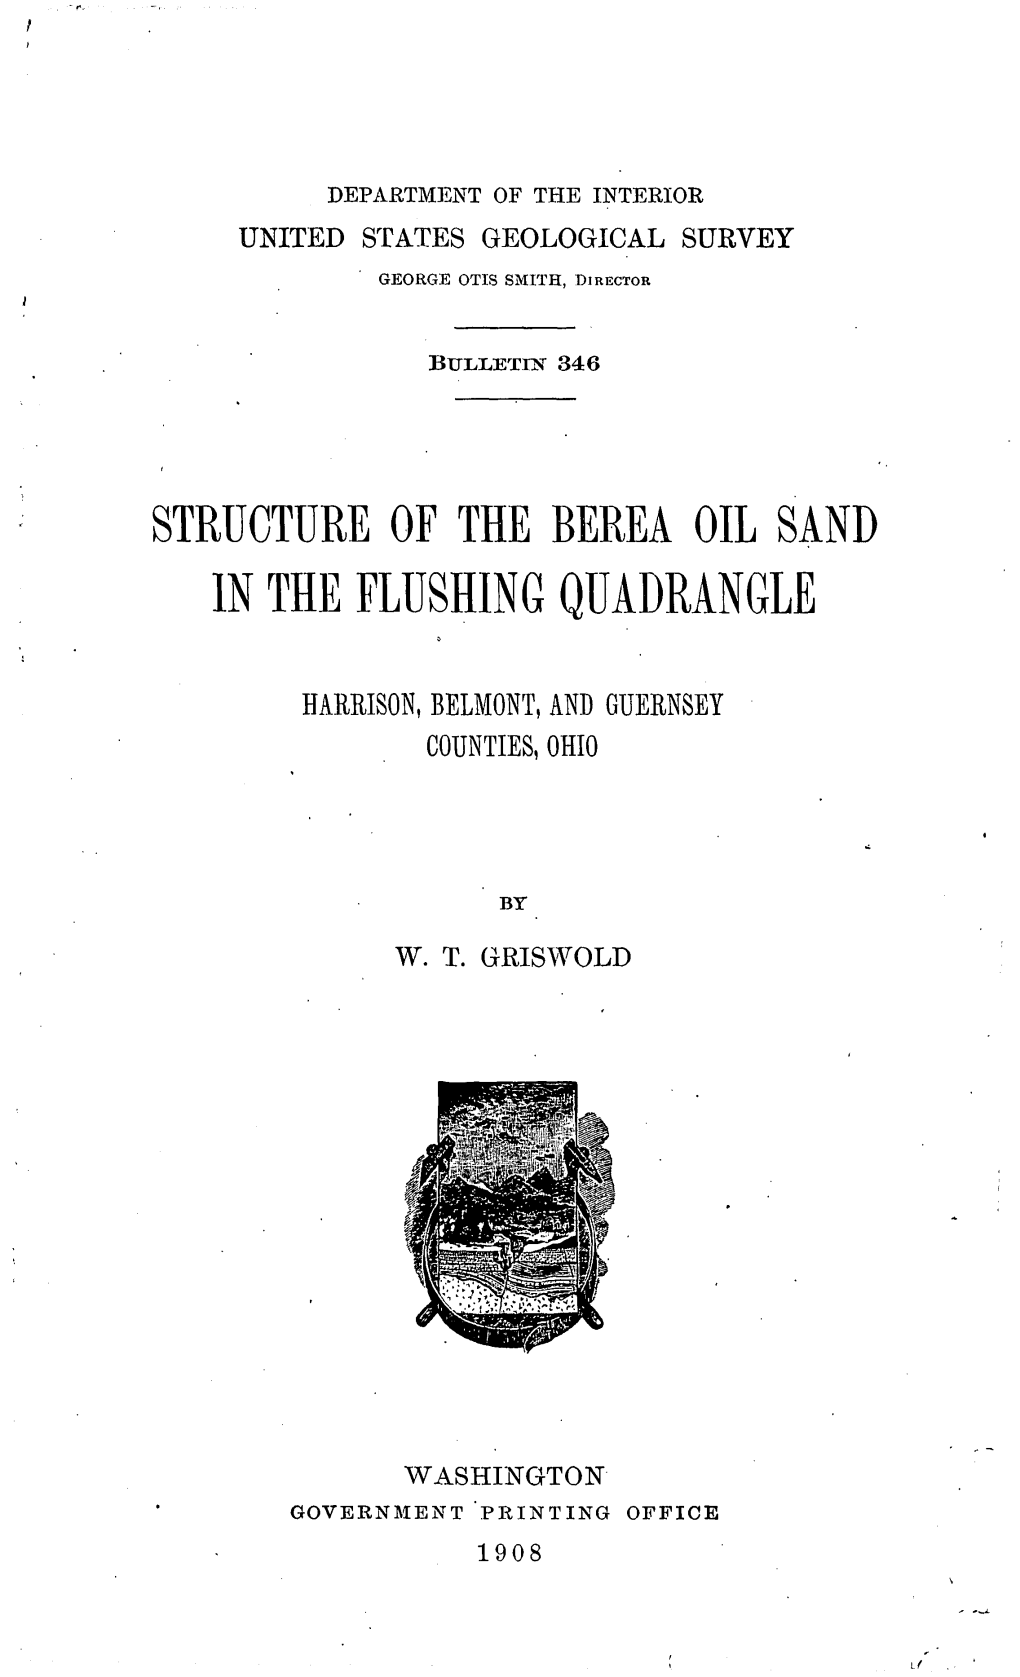 Structure of the Berea Oil Sand in the Flushing Quadrangle